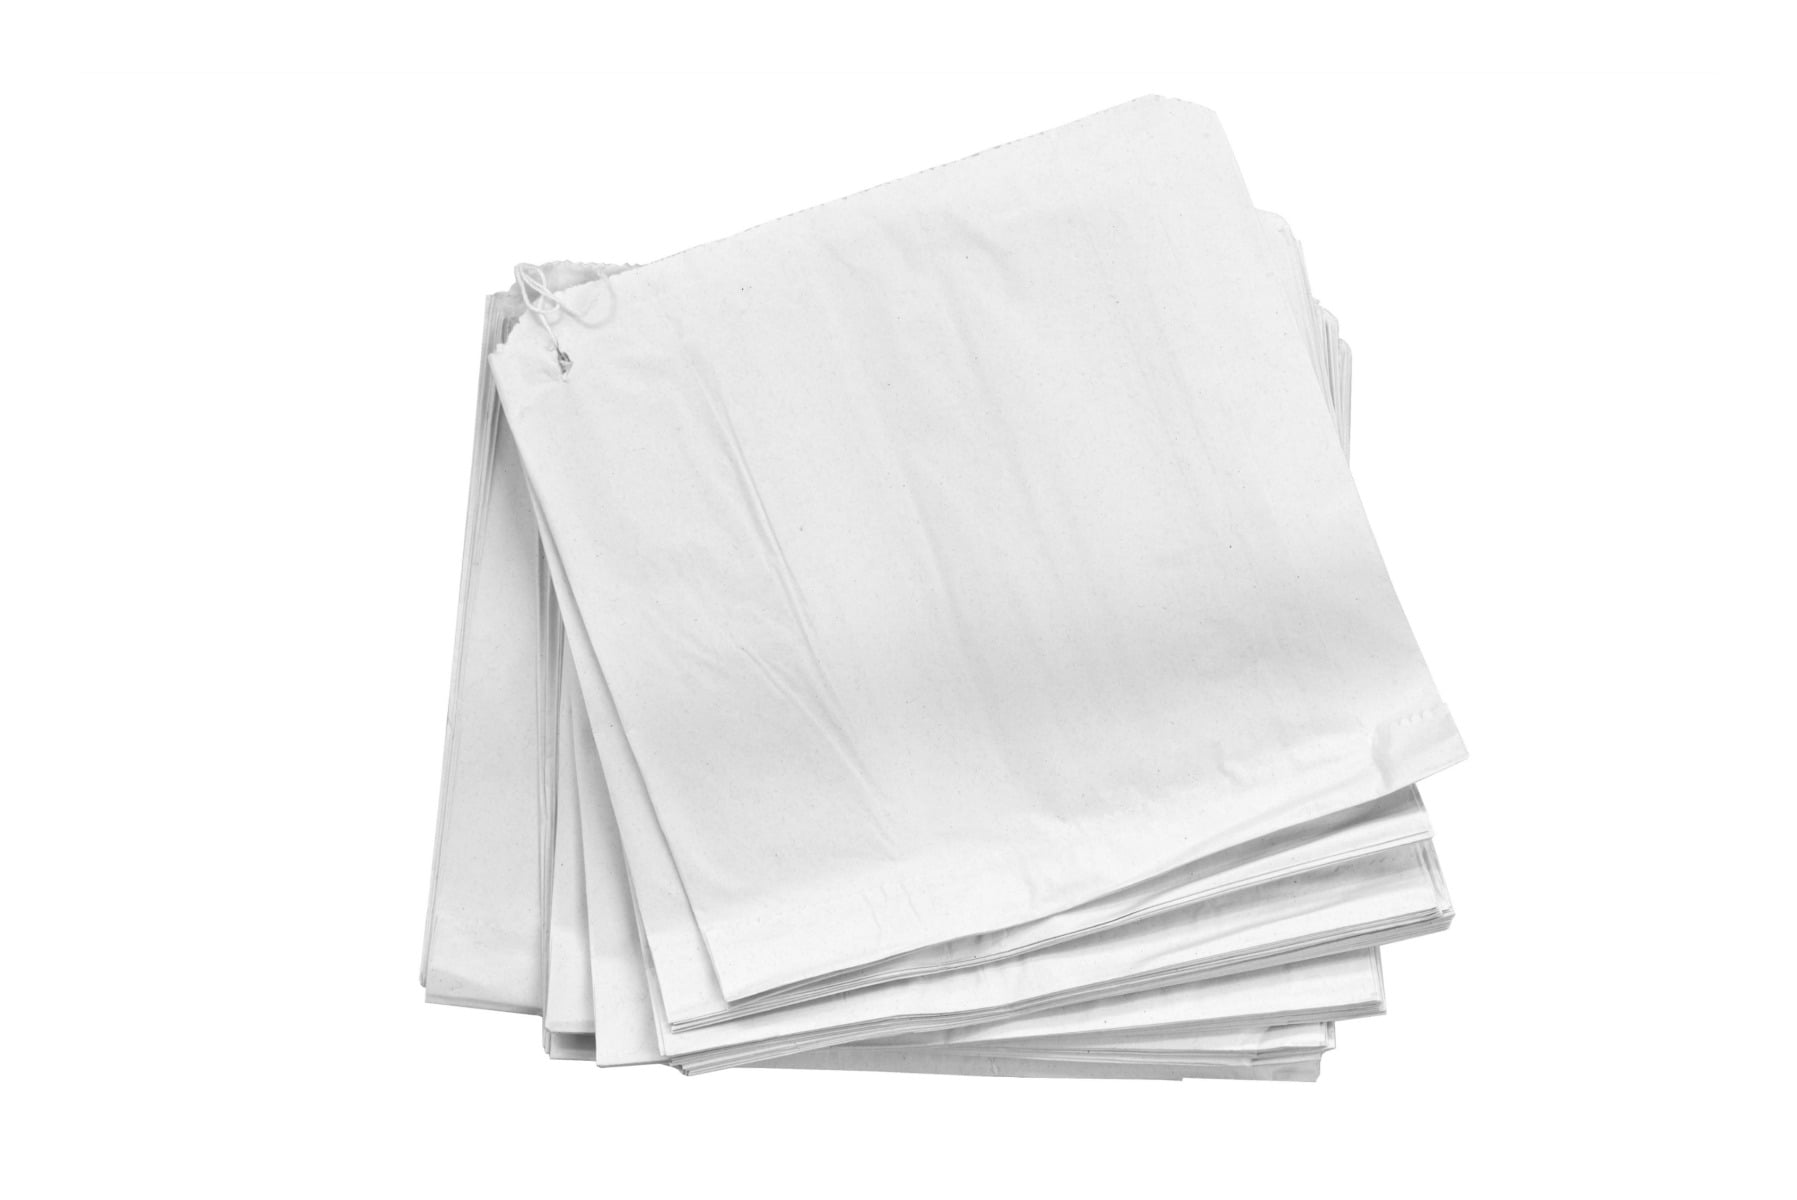 Sandwich Bags 10" x 10" White Recyclable Sulphite Paper Bags Pack of 1000 